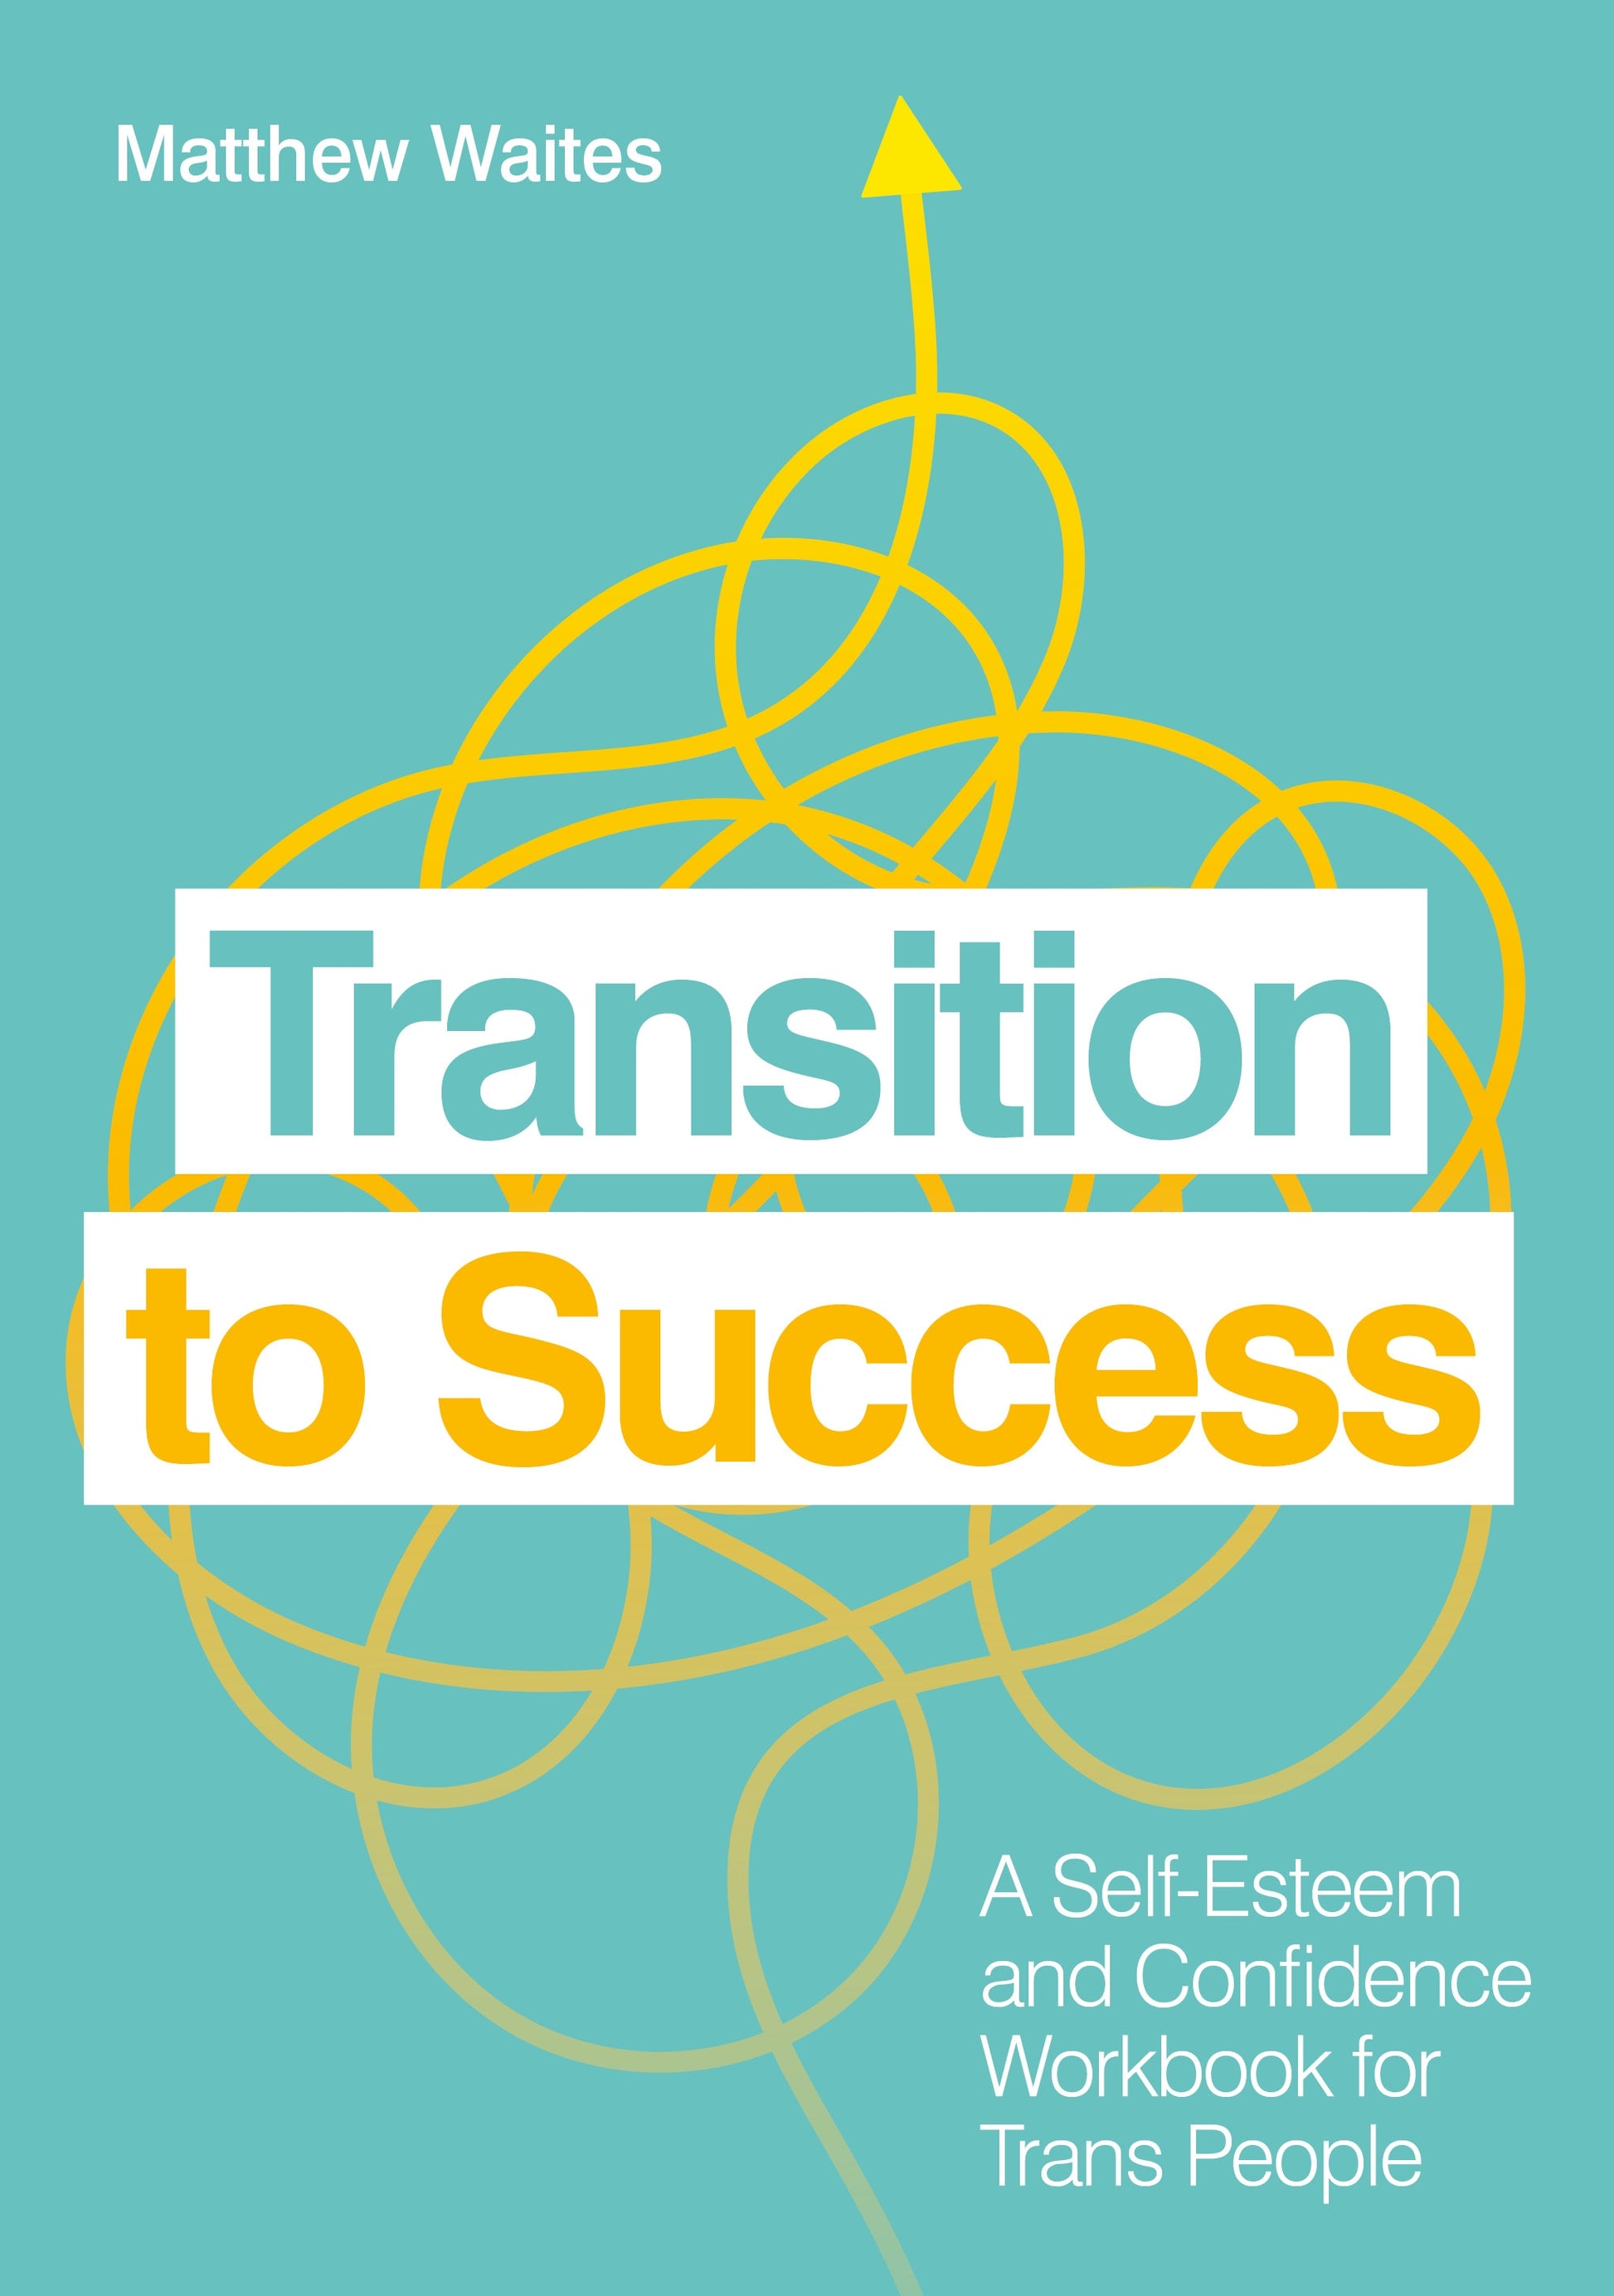 Transition to Success by Matthew Waites